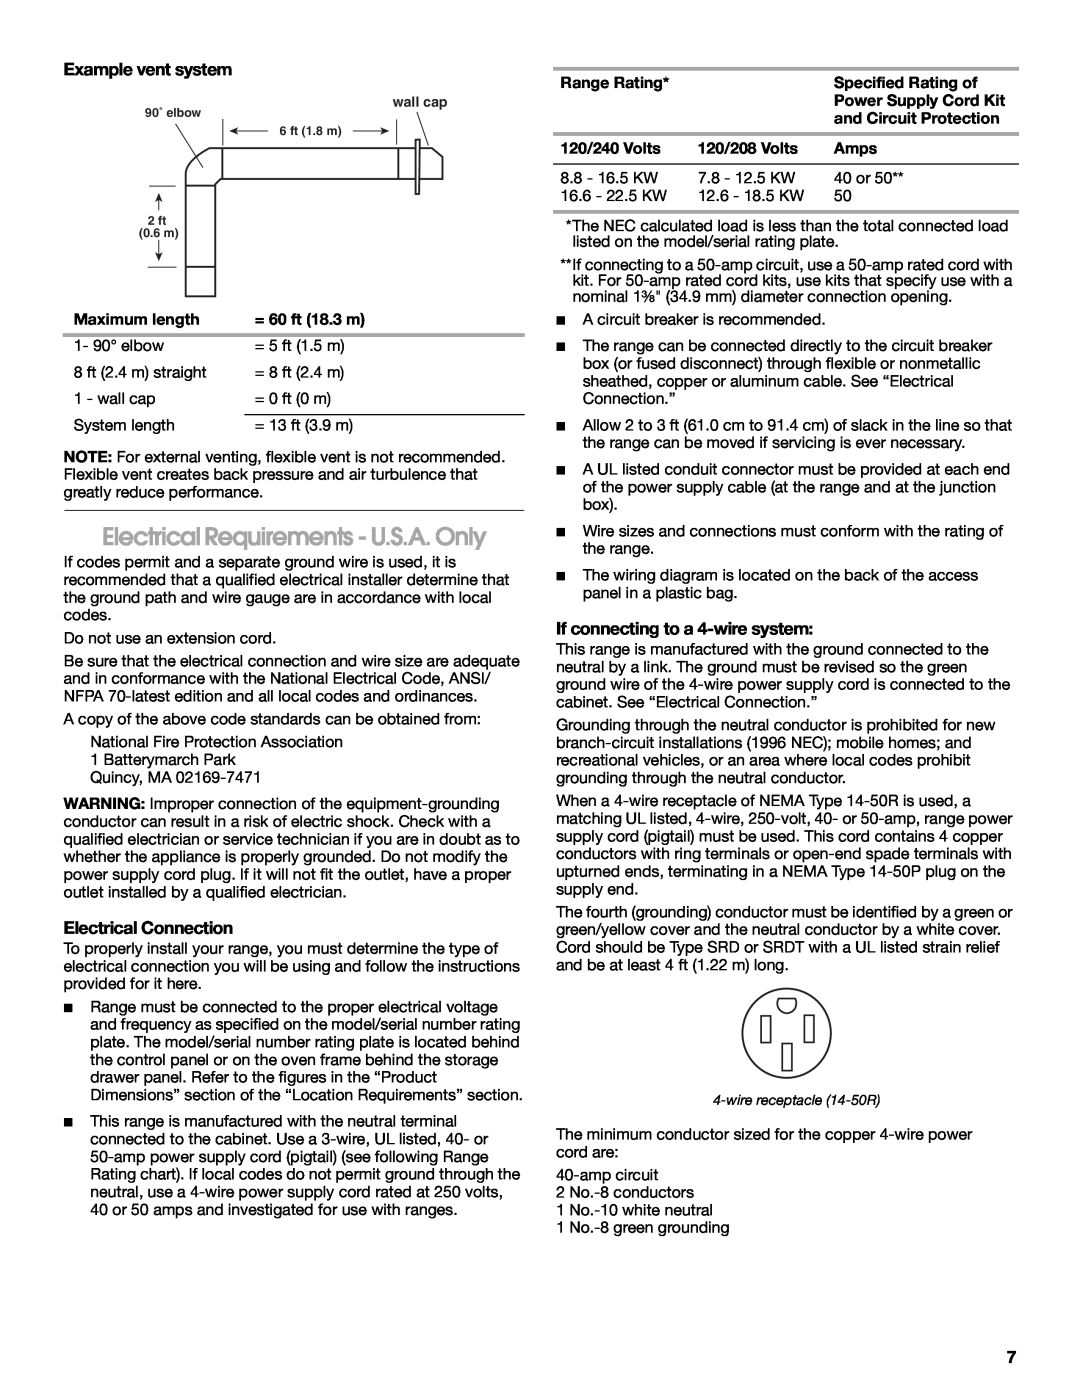 Jenn-Air W10430955A Electrical Requirements - U.S.A. Only, Example vent system, Electrical Connection 